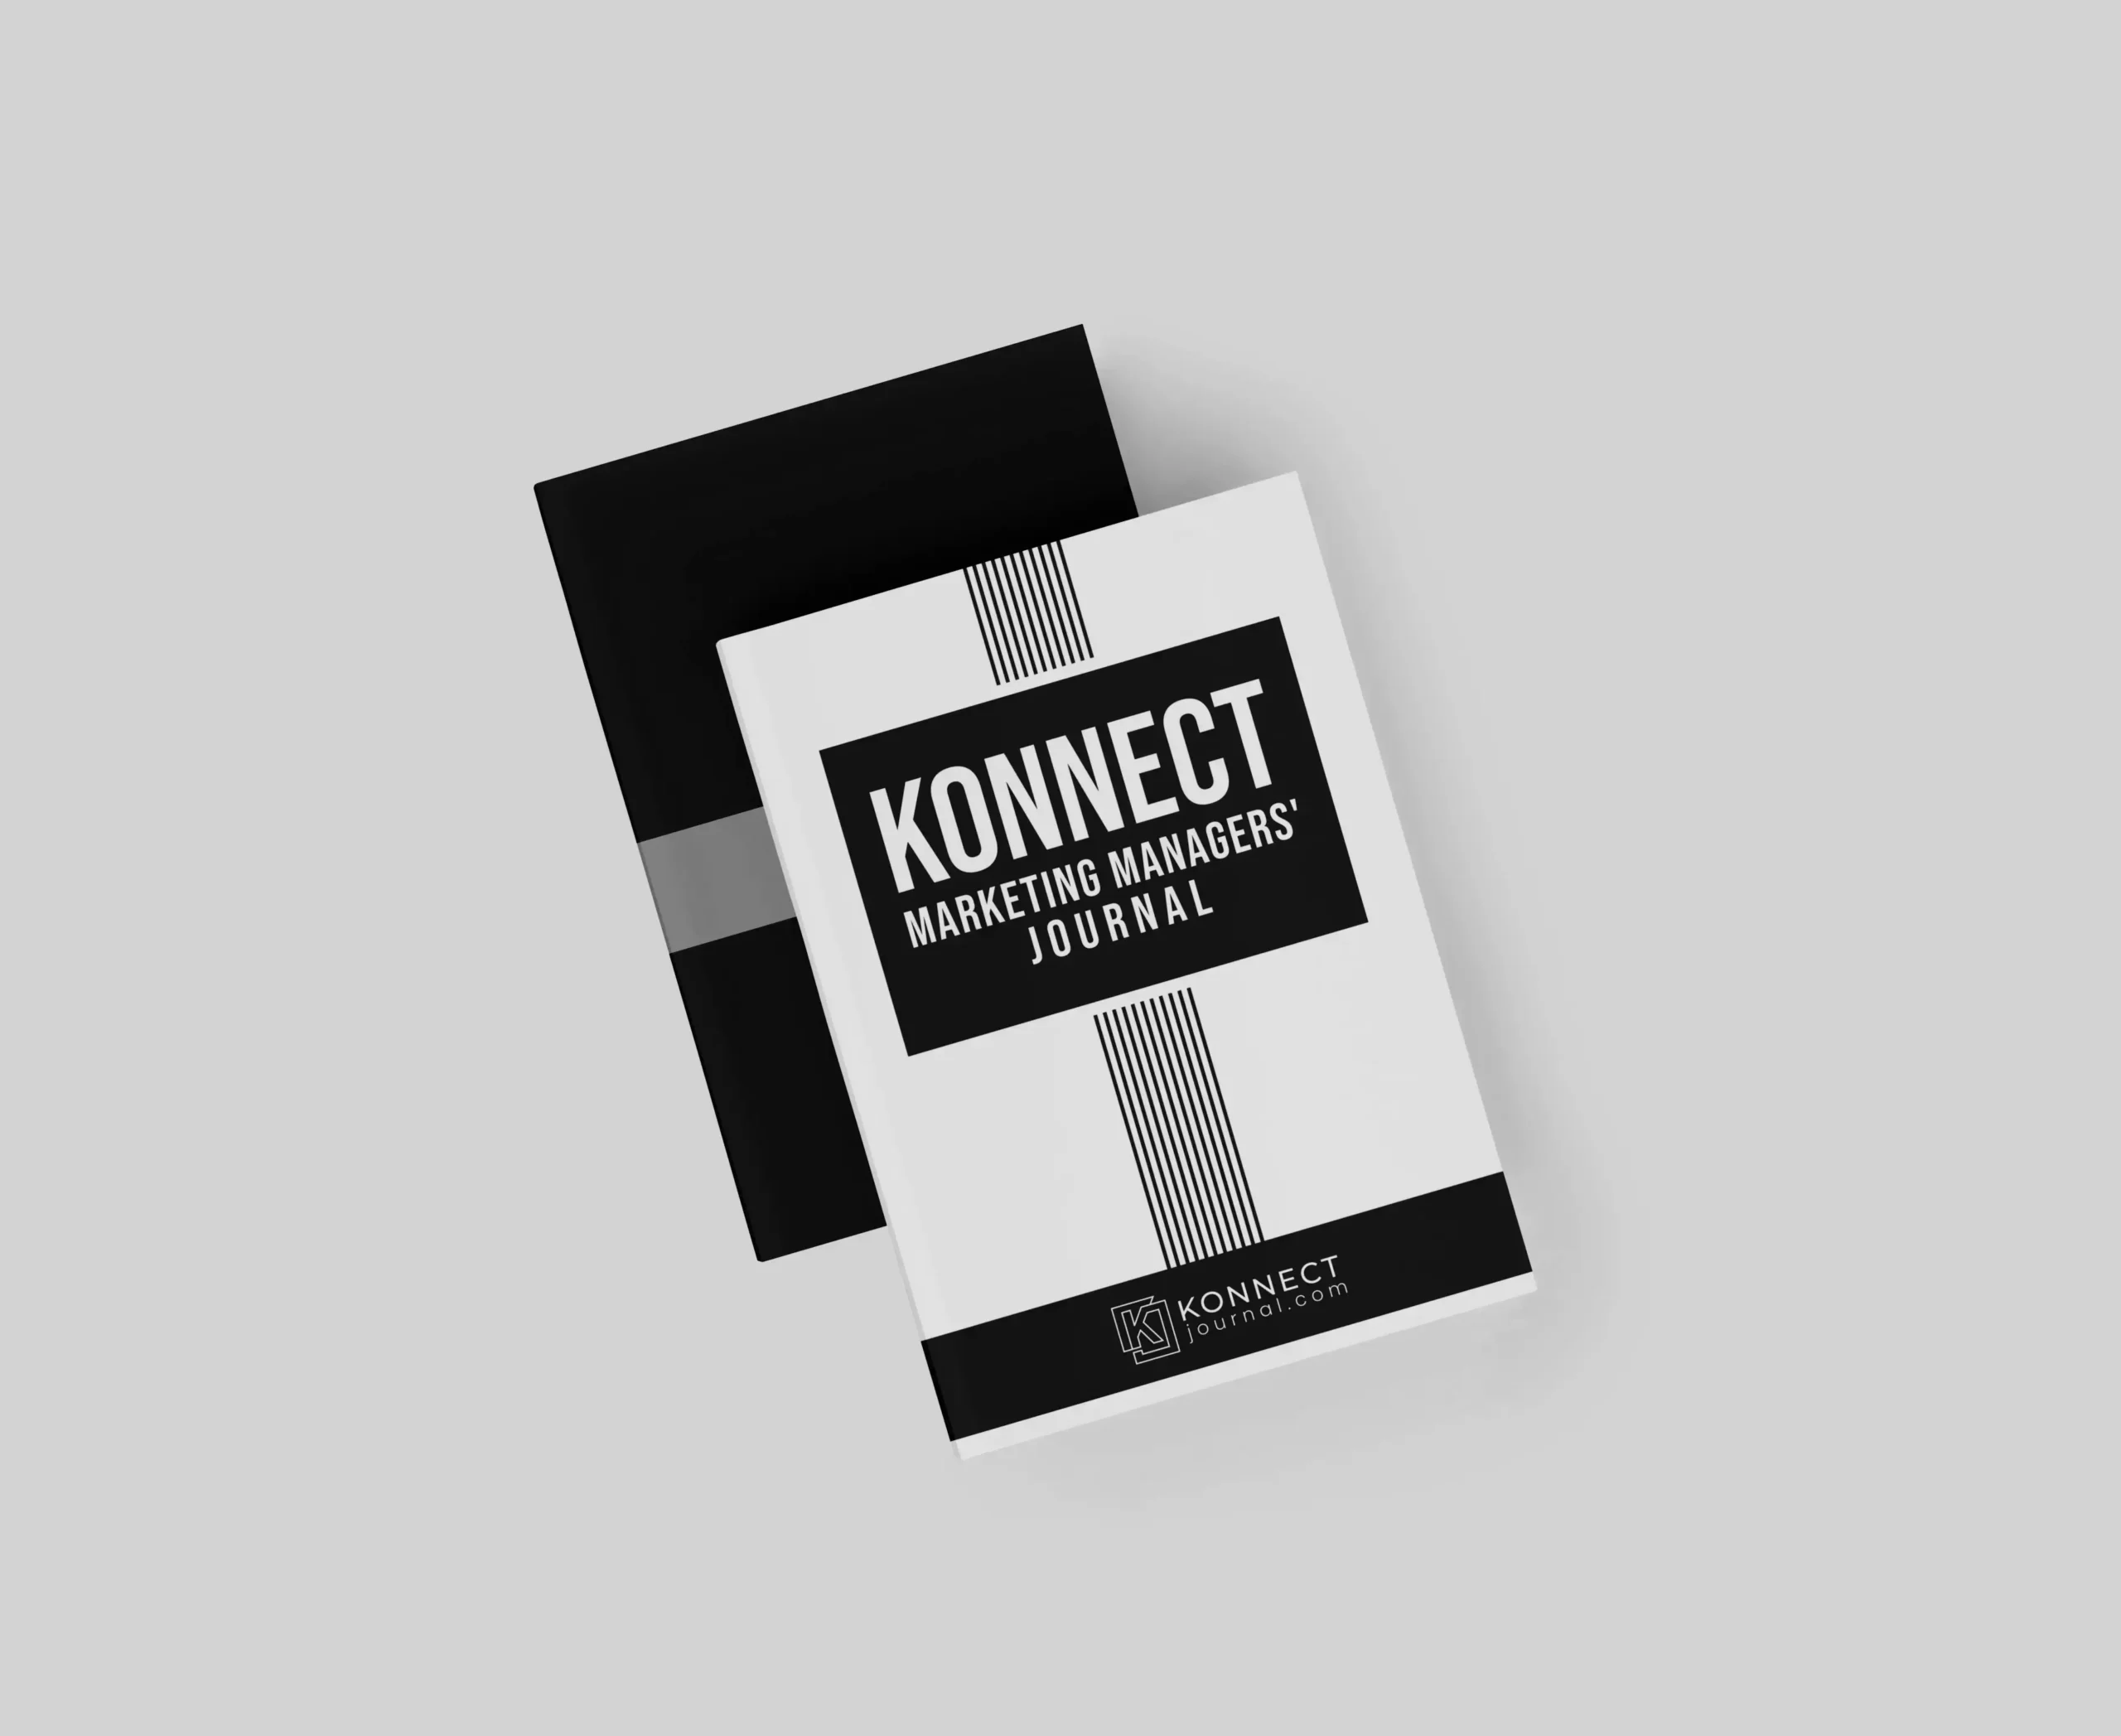 Konnect Marketing Managers’ Journal